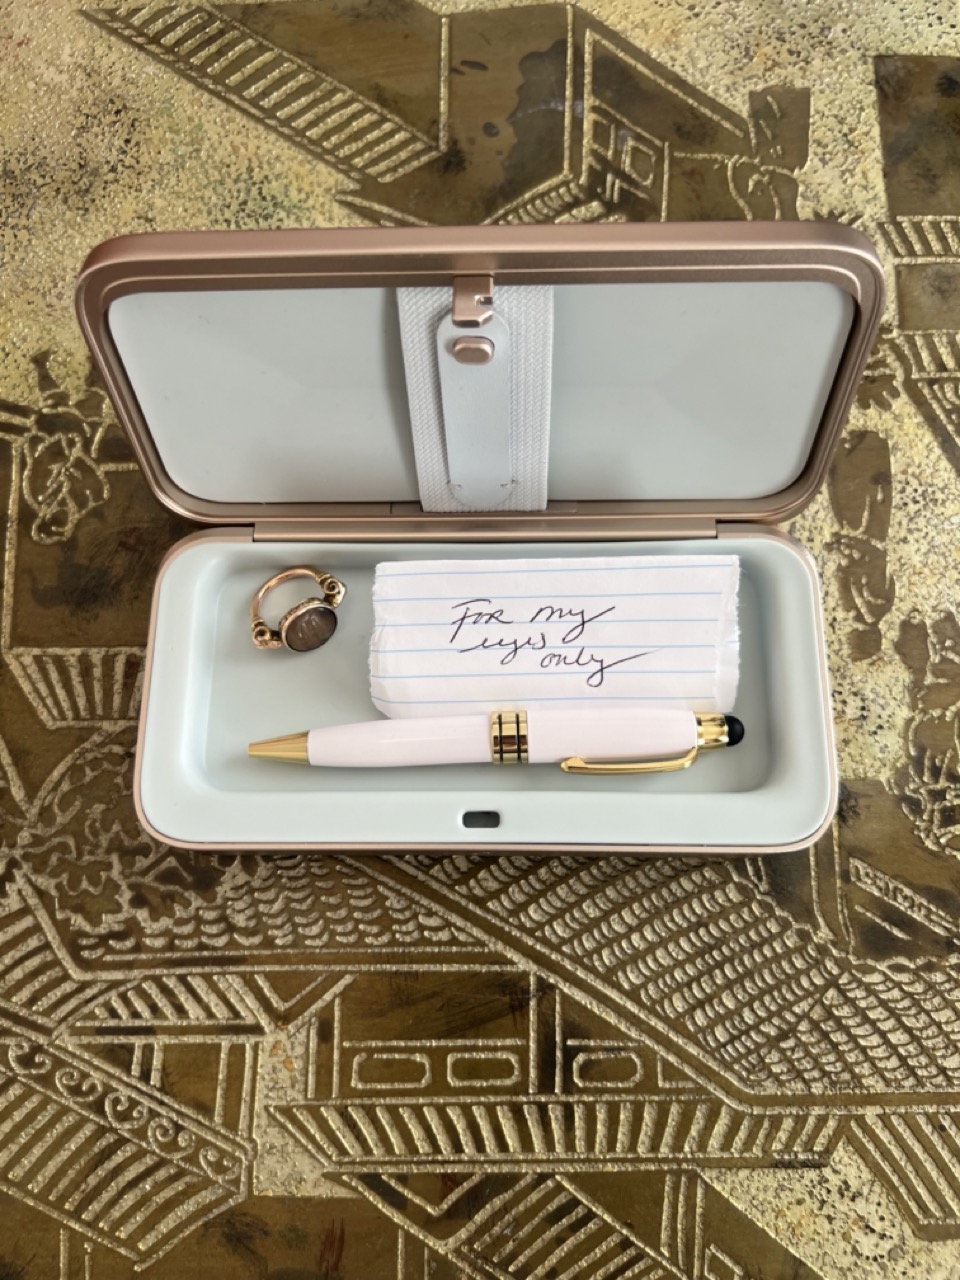 photograph of a TROVA go safe containing a pen, a ring, and a piece of paper on a patterned gold and cream background